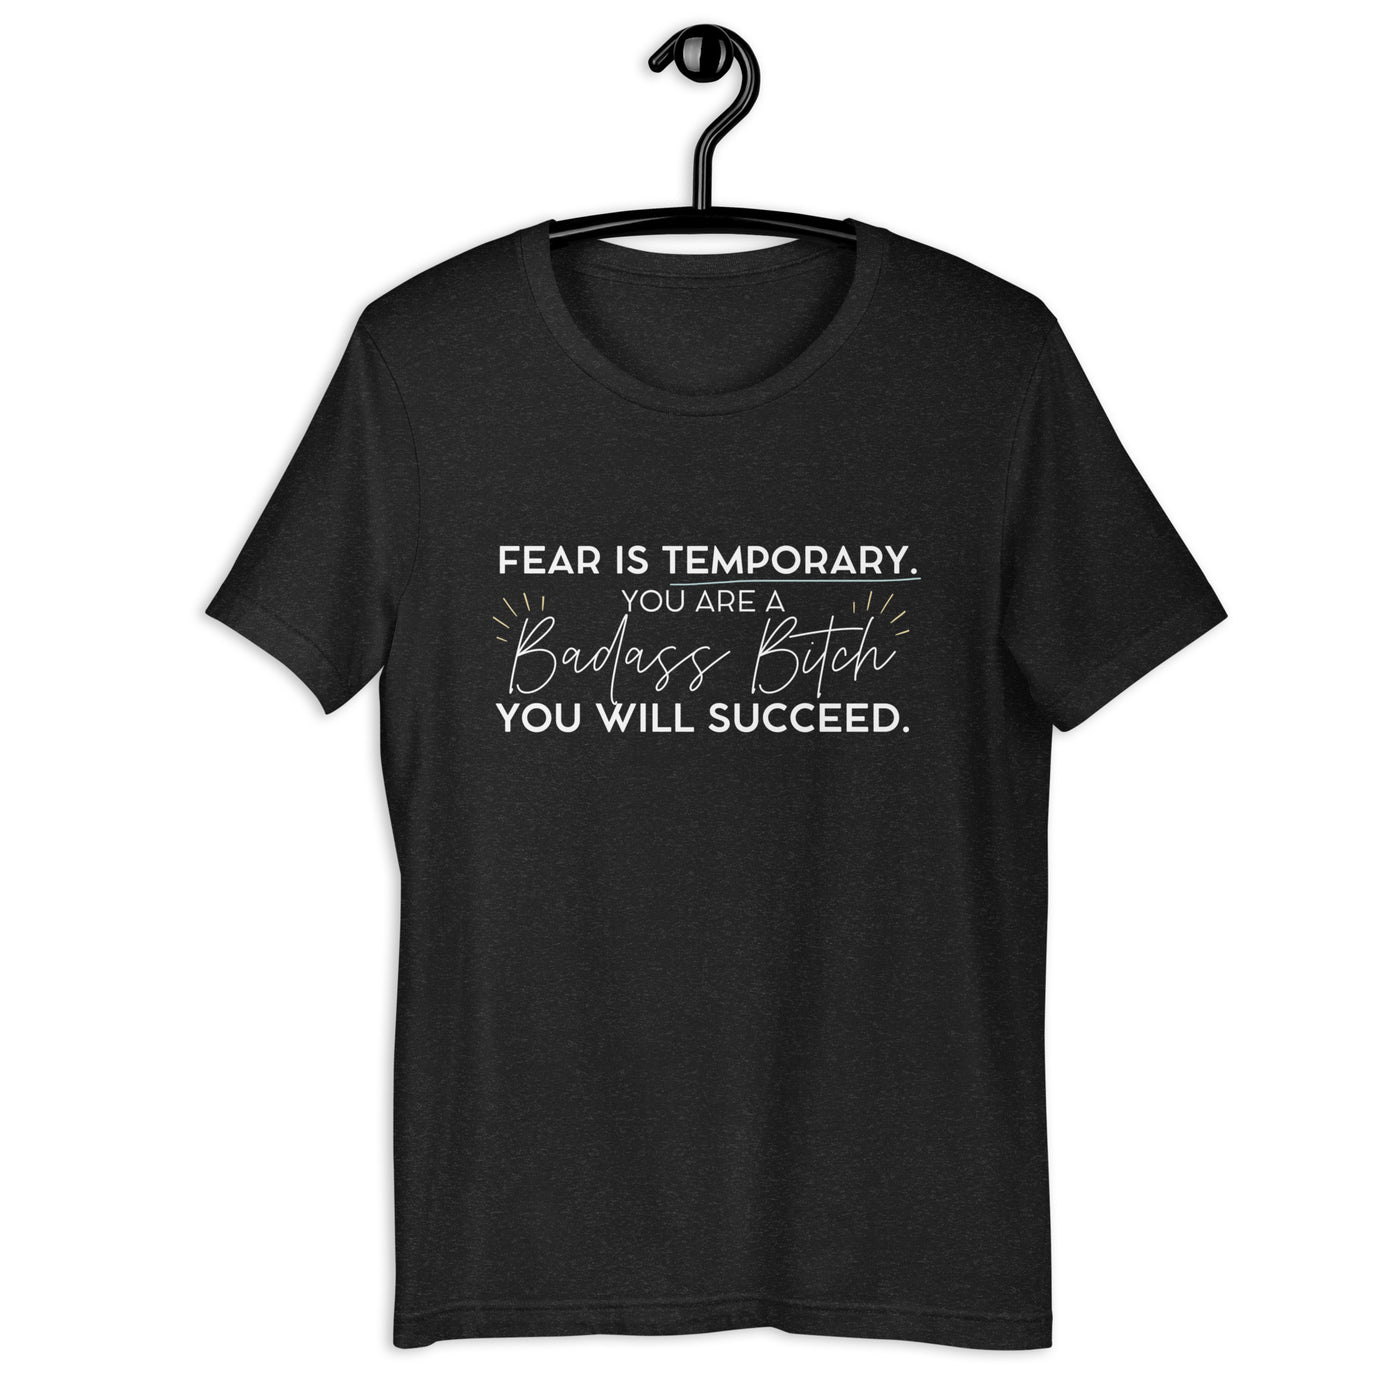 Chrissy's Affirmation T-Shirt (Limited Supply!)